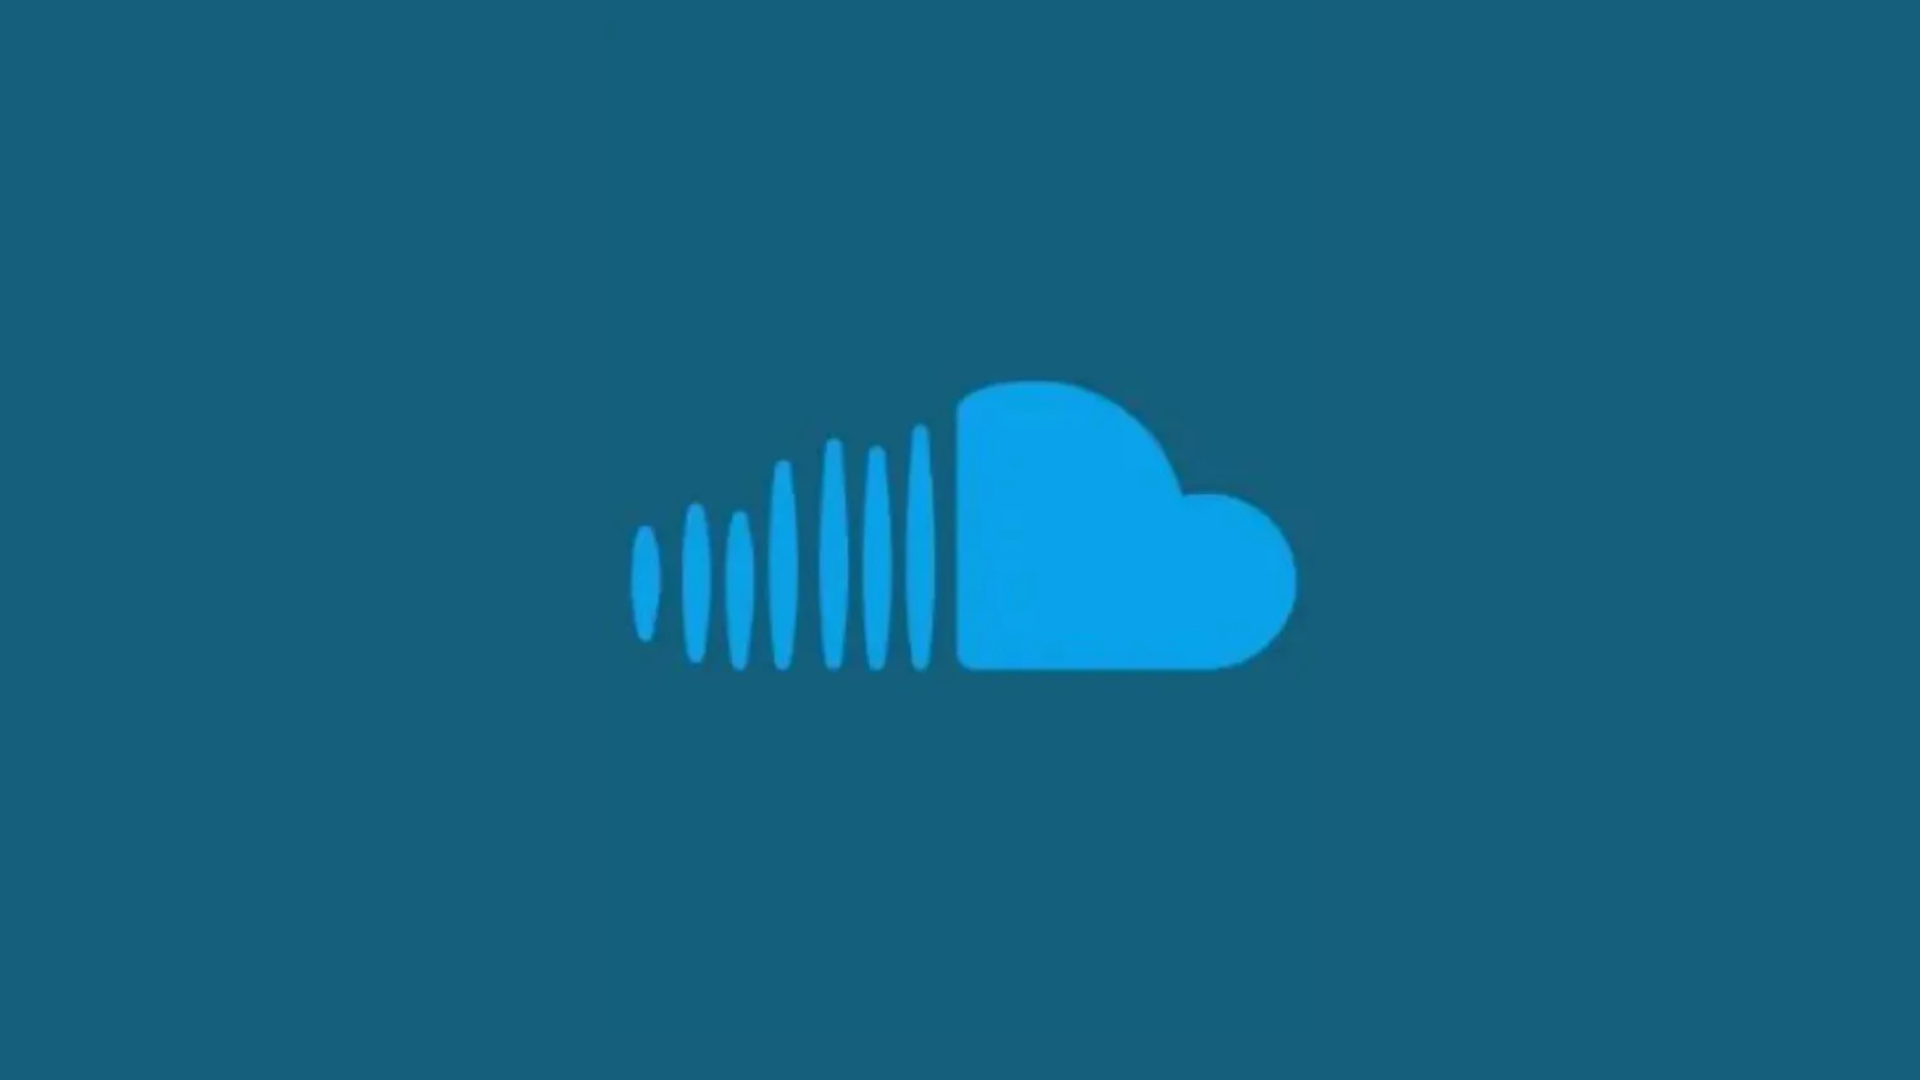 Why Soundcloud Turned Blue